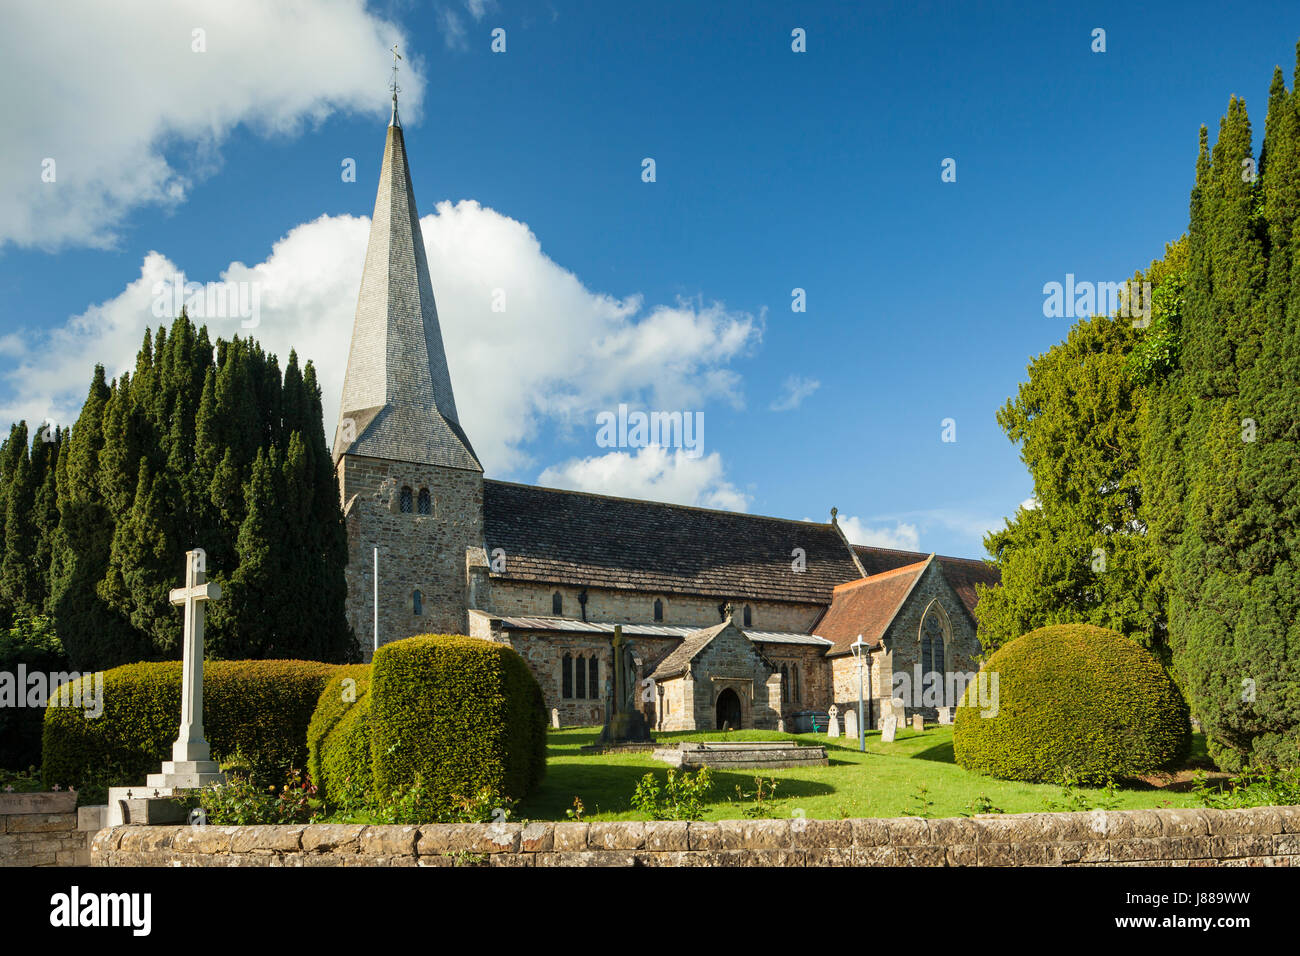 Frühling nachmittags in St. Andrews Church in Bognerei Dorf, East Sussex, England. Stockfoto